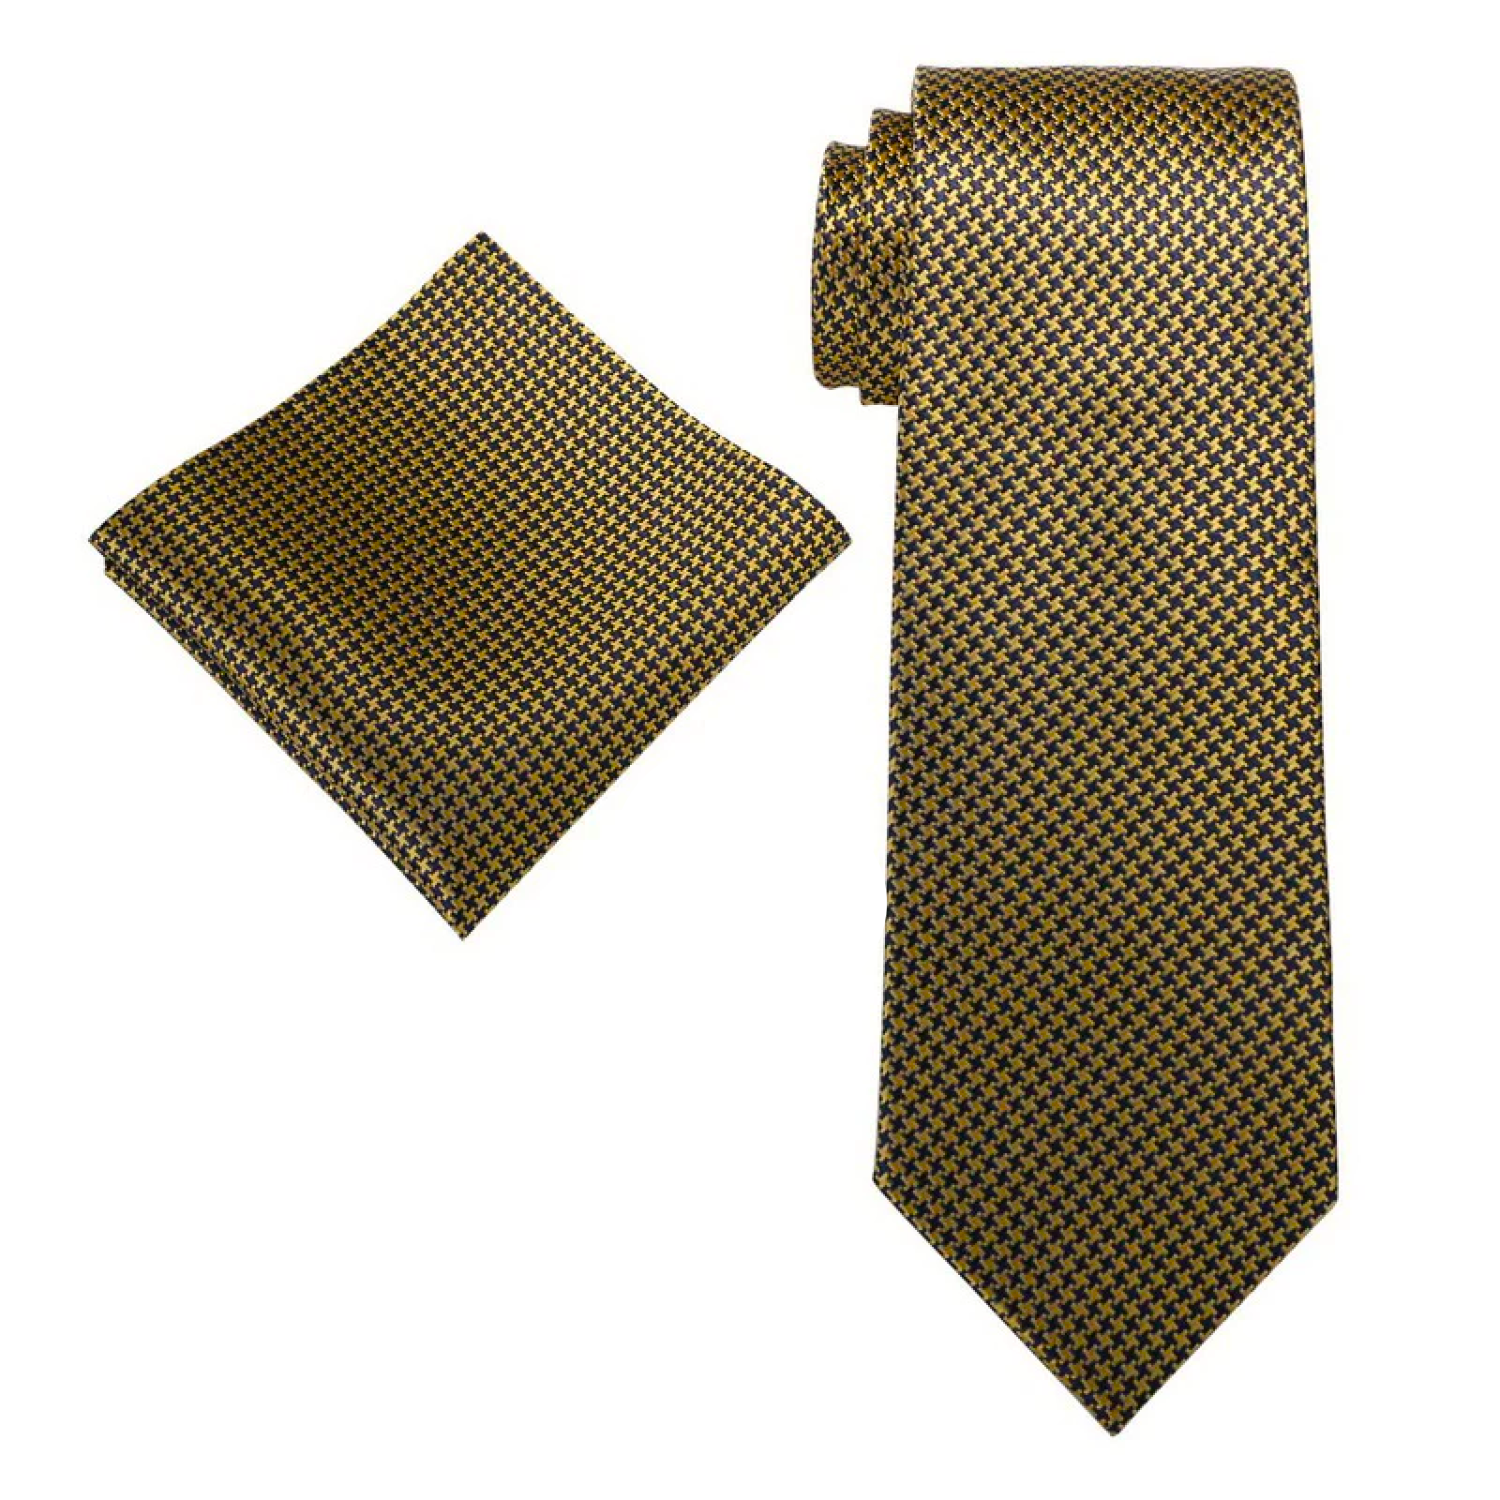 Alt View: Gold and Blue Hounds Tooth Necktie and Square